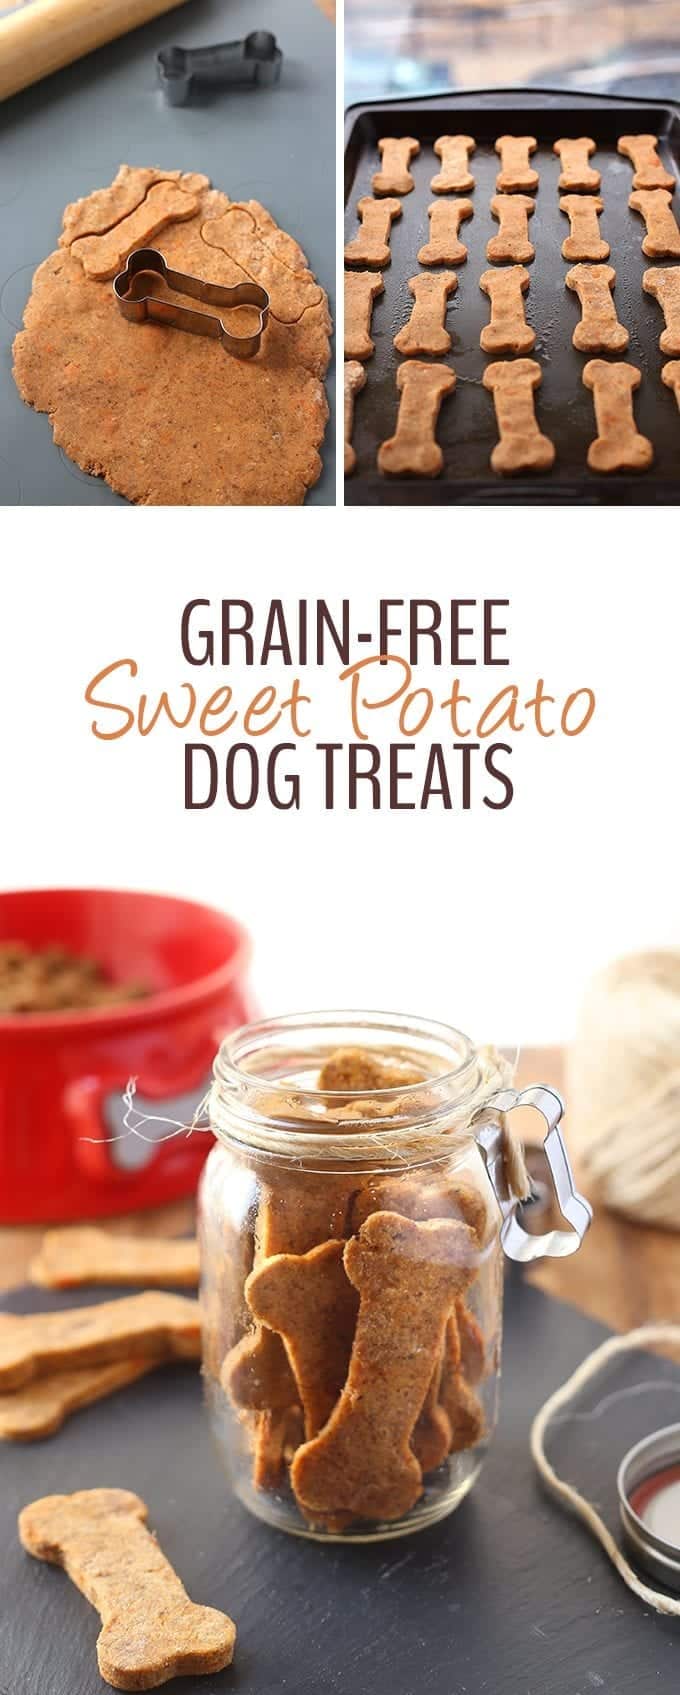 Treat your pup with these Grain-Free Sweet Potato Dog Treats made from just 5 wholesome and healthy ingredients. Your dog will love eating them as much as you enjoy spoiling them!